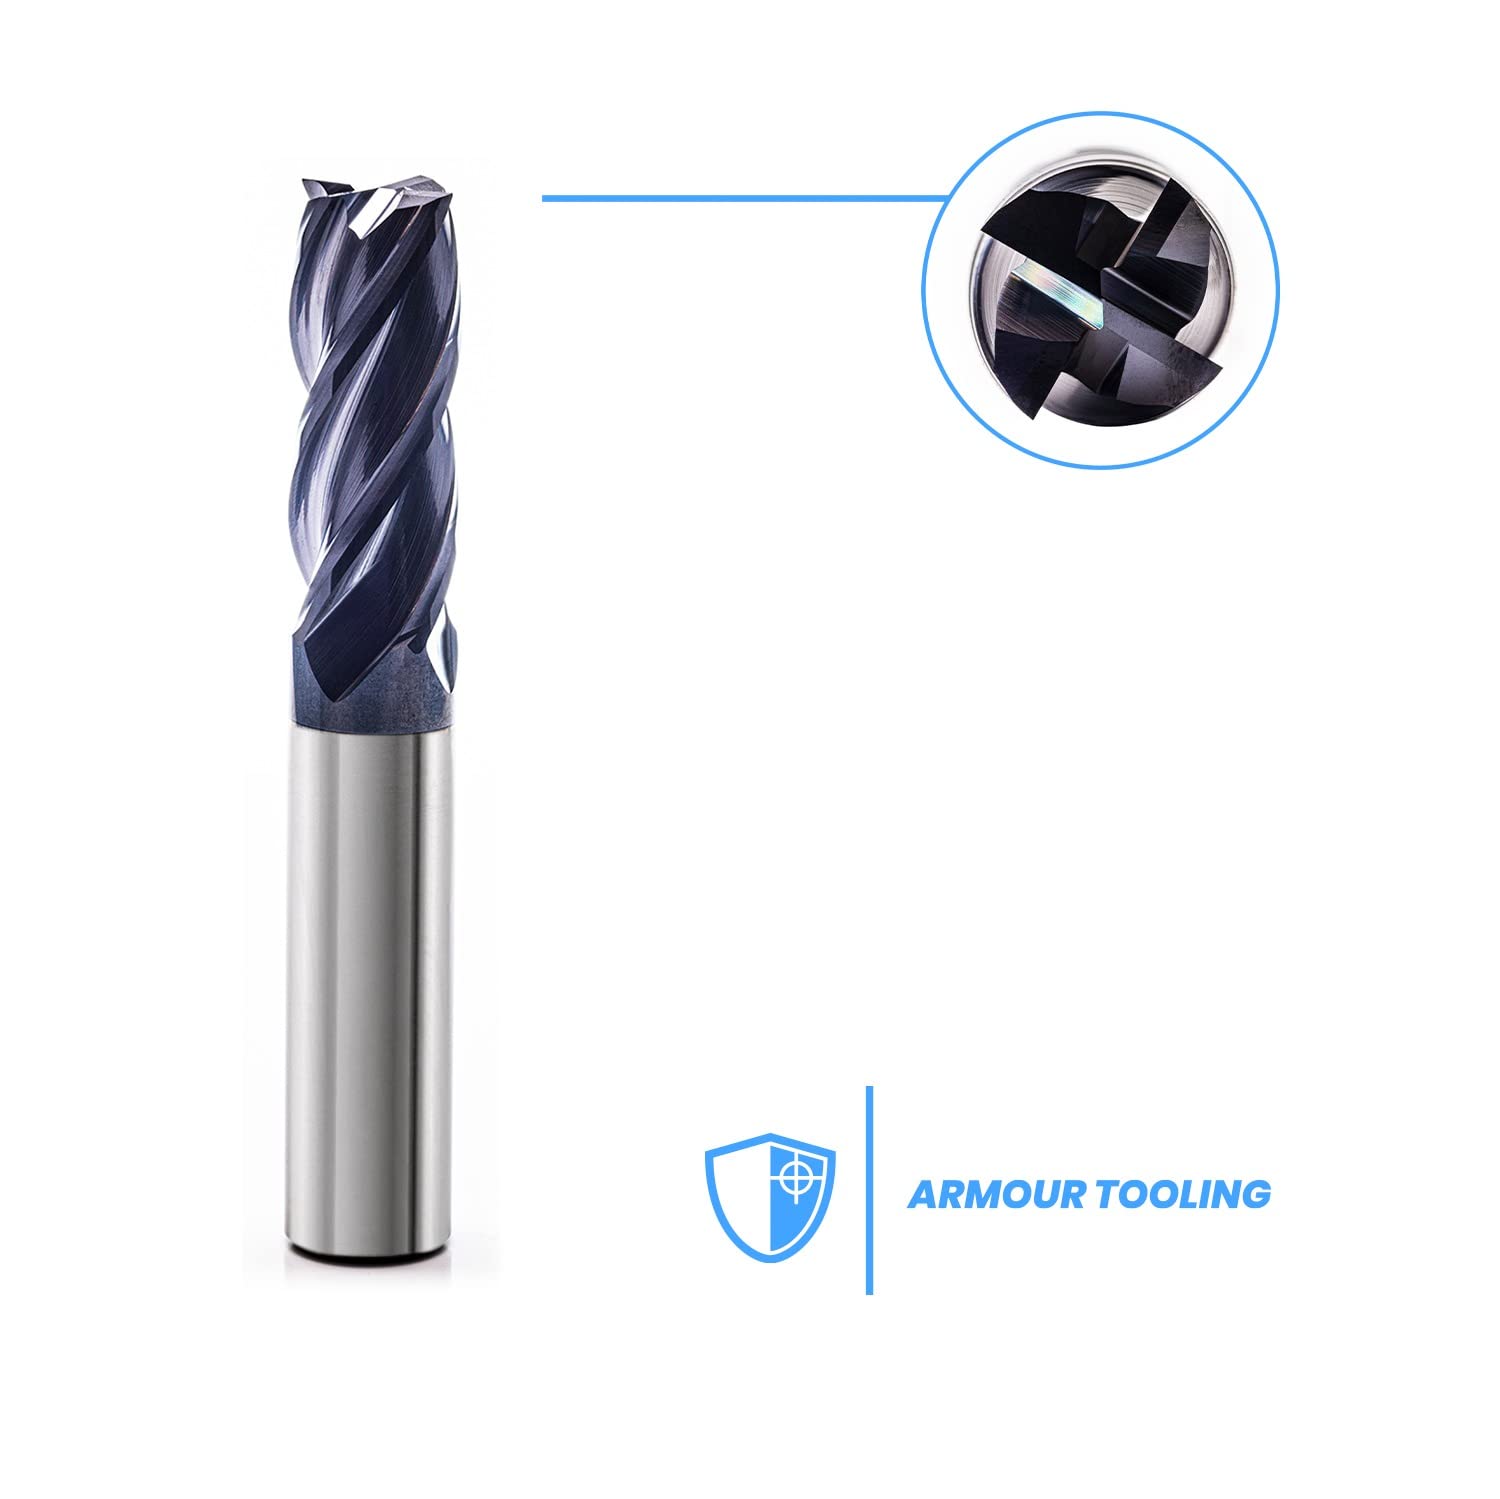 ARMOUR TOOLING – 8mm Tungsten Carbide End mill - 4 Flute Sharp Corner Cutter - CNC Milling Tool - for Alloy Steels/Hardened Steels - High Performance Milling Cutter - Roughing And Finishing